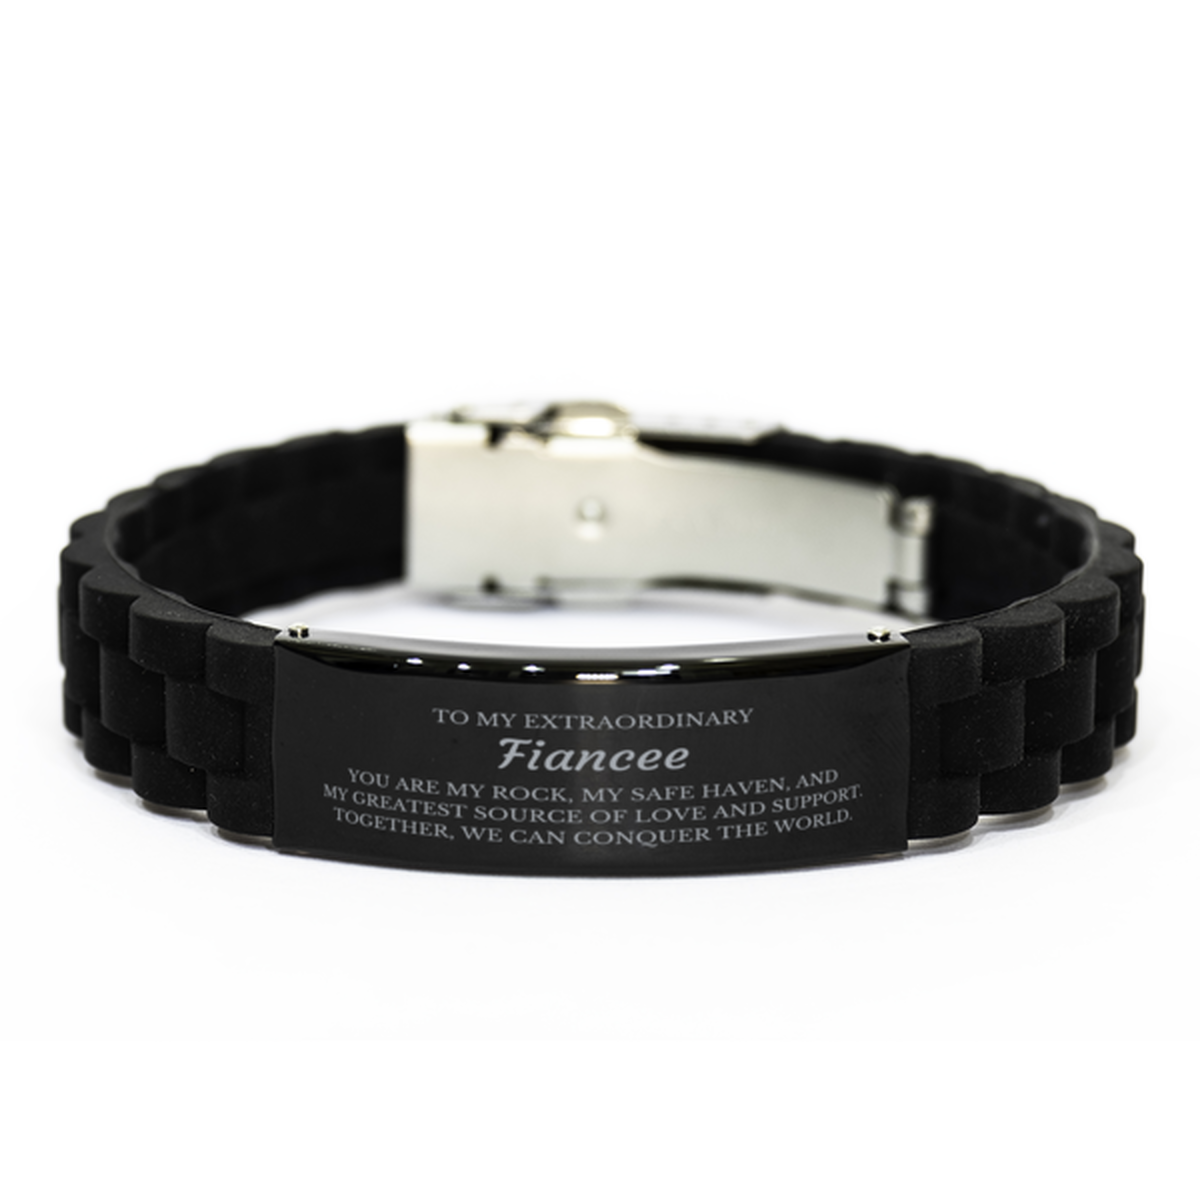 To My Extraordinary Fiancee Gifts, Together, we can conquer the world, Birthday Black Glidelock Clasp Bracelet For Fiancee, Christmas Gifts For Fiancee